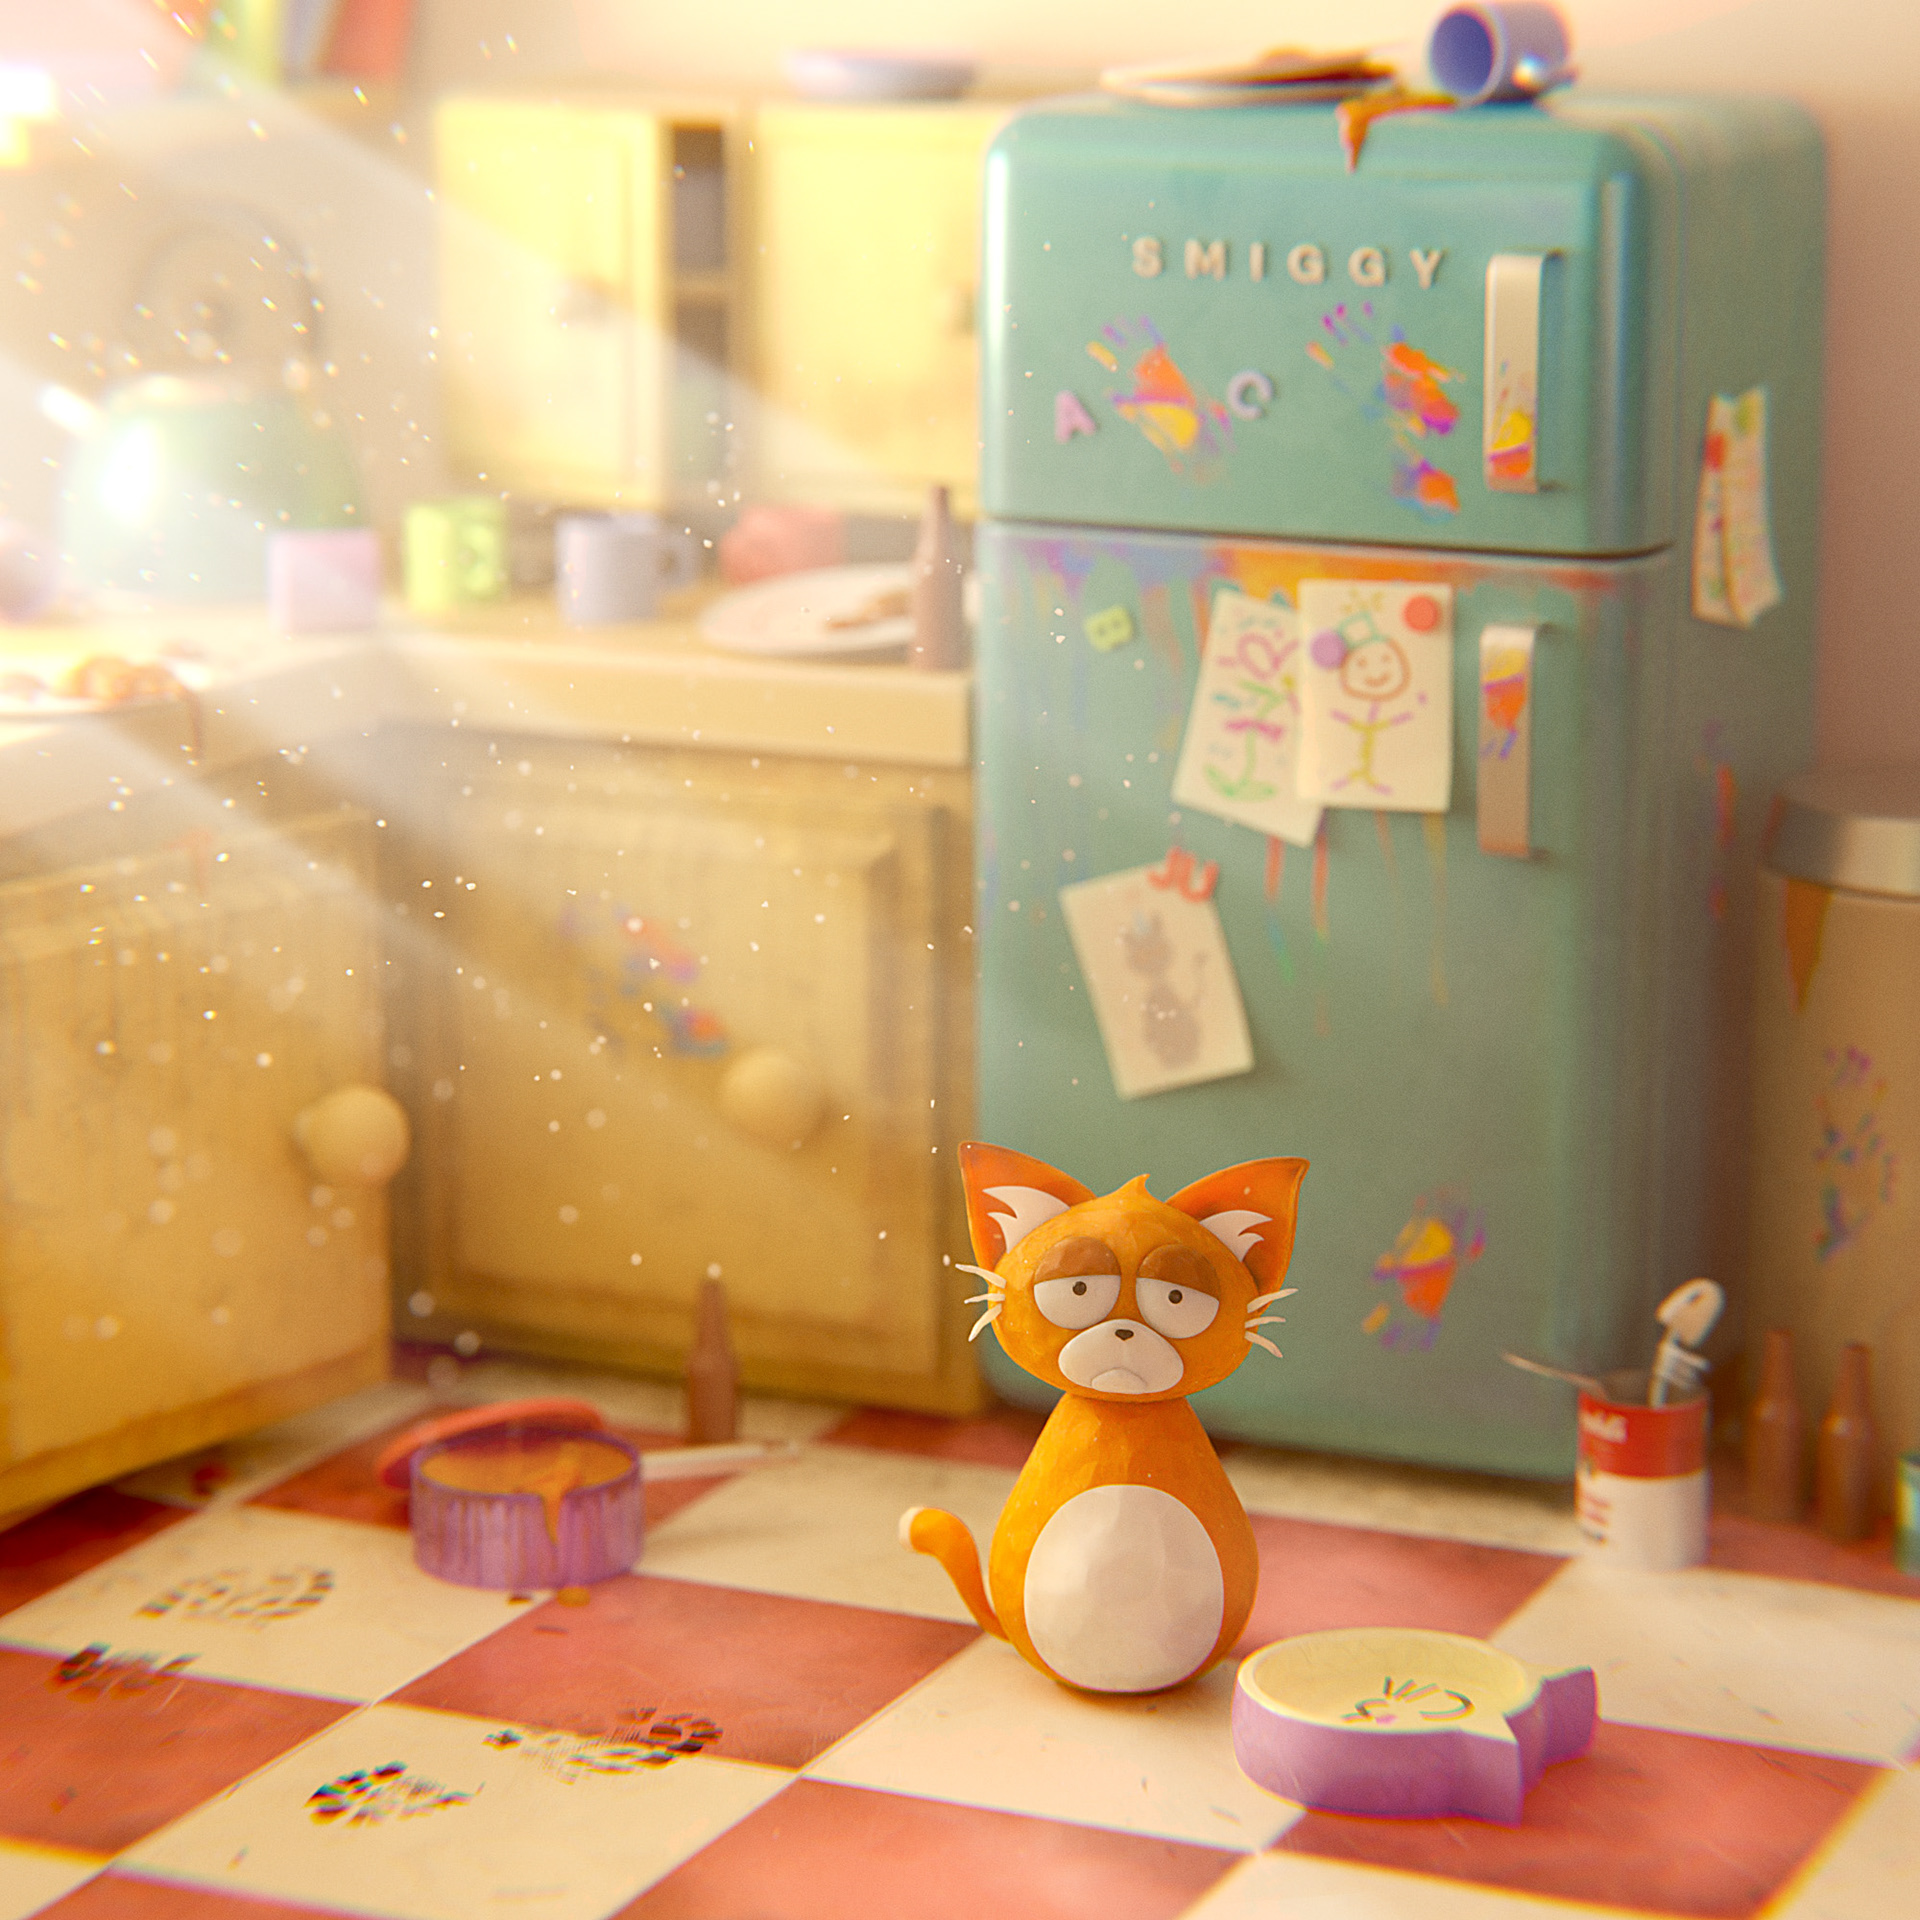 The Cat and the Dirty Kitchen on Behance